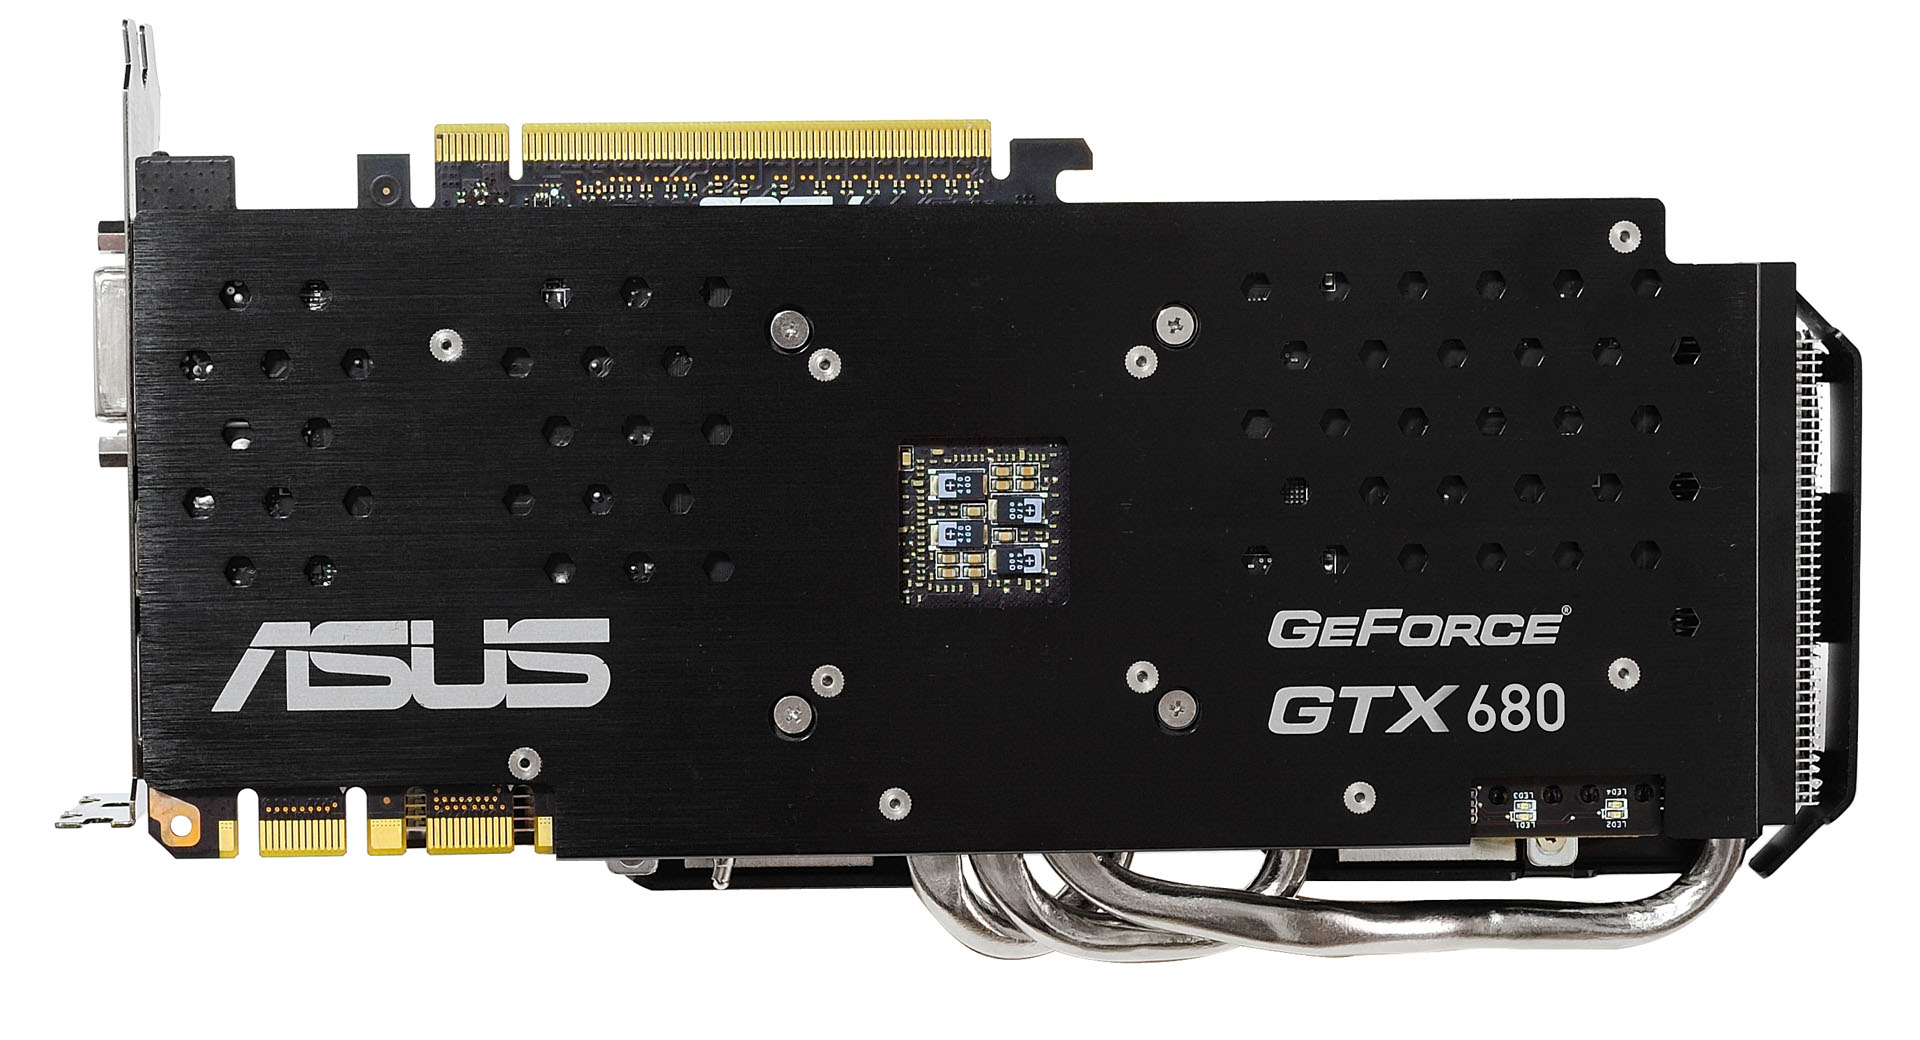 Media asset (photo, screenshot, or image in full size) related to contents posted at 3dfxzone.it | Image Name: news18395ASUS-GeForce-GTX-680-DirectCU-II-dual-slot_2.jpg